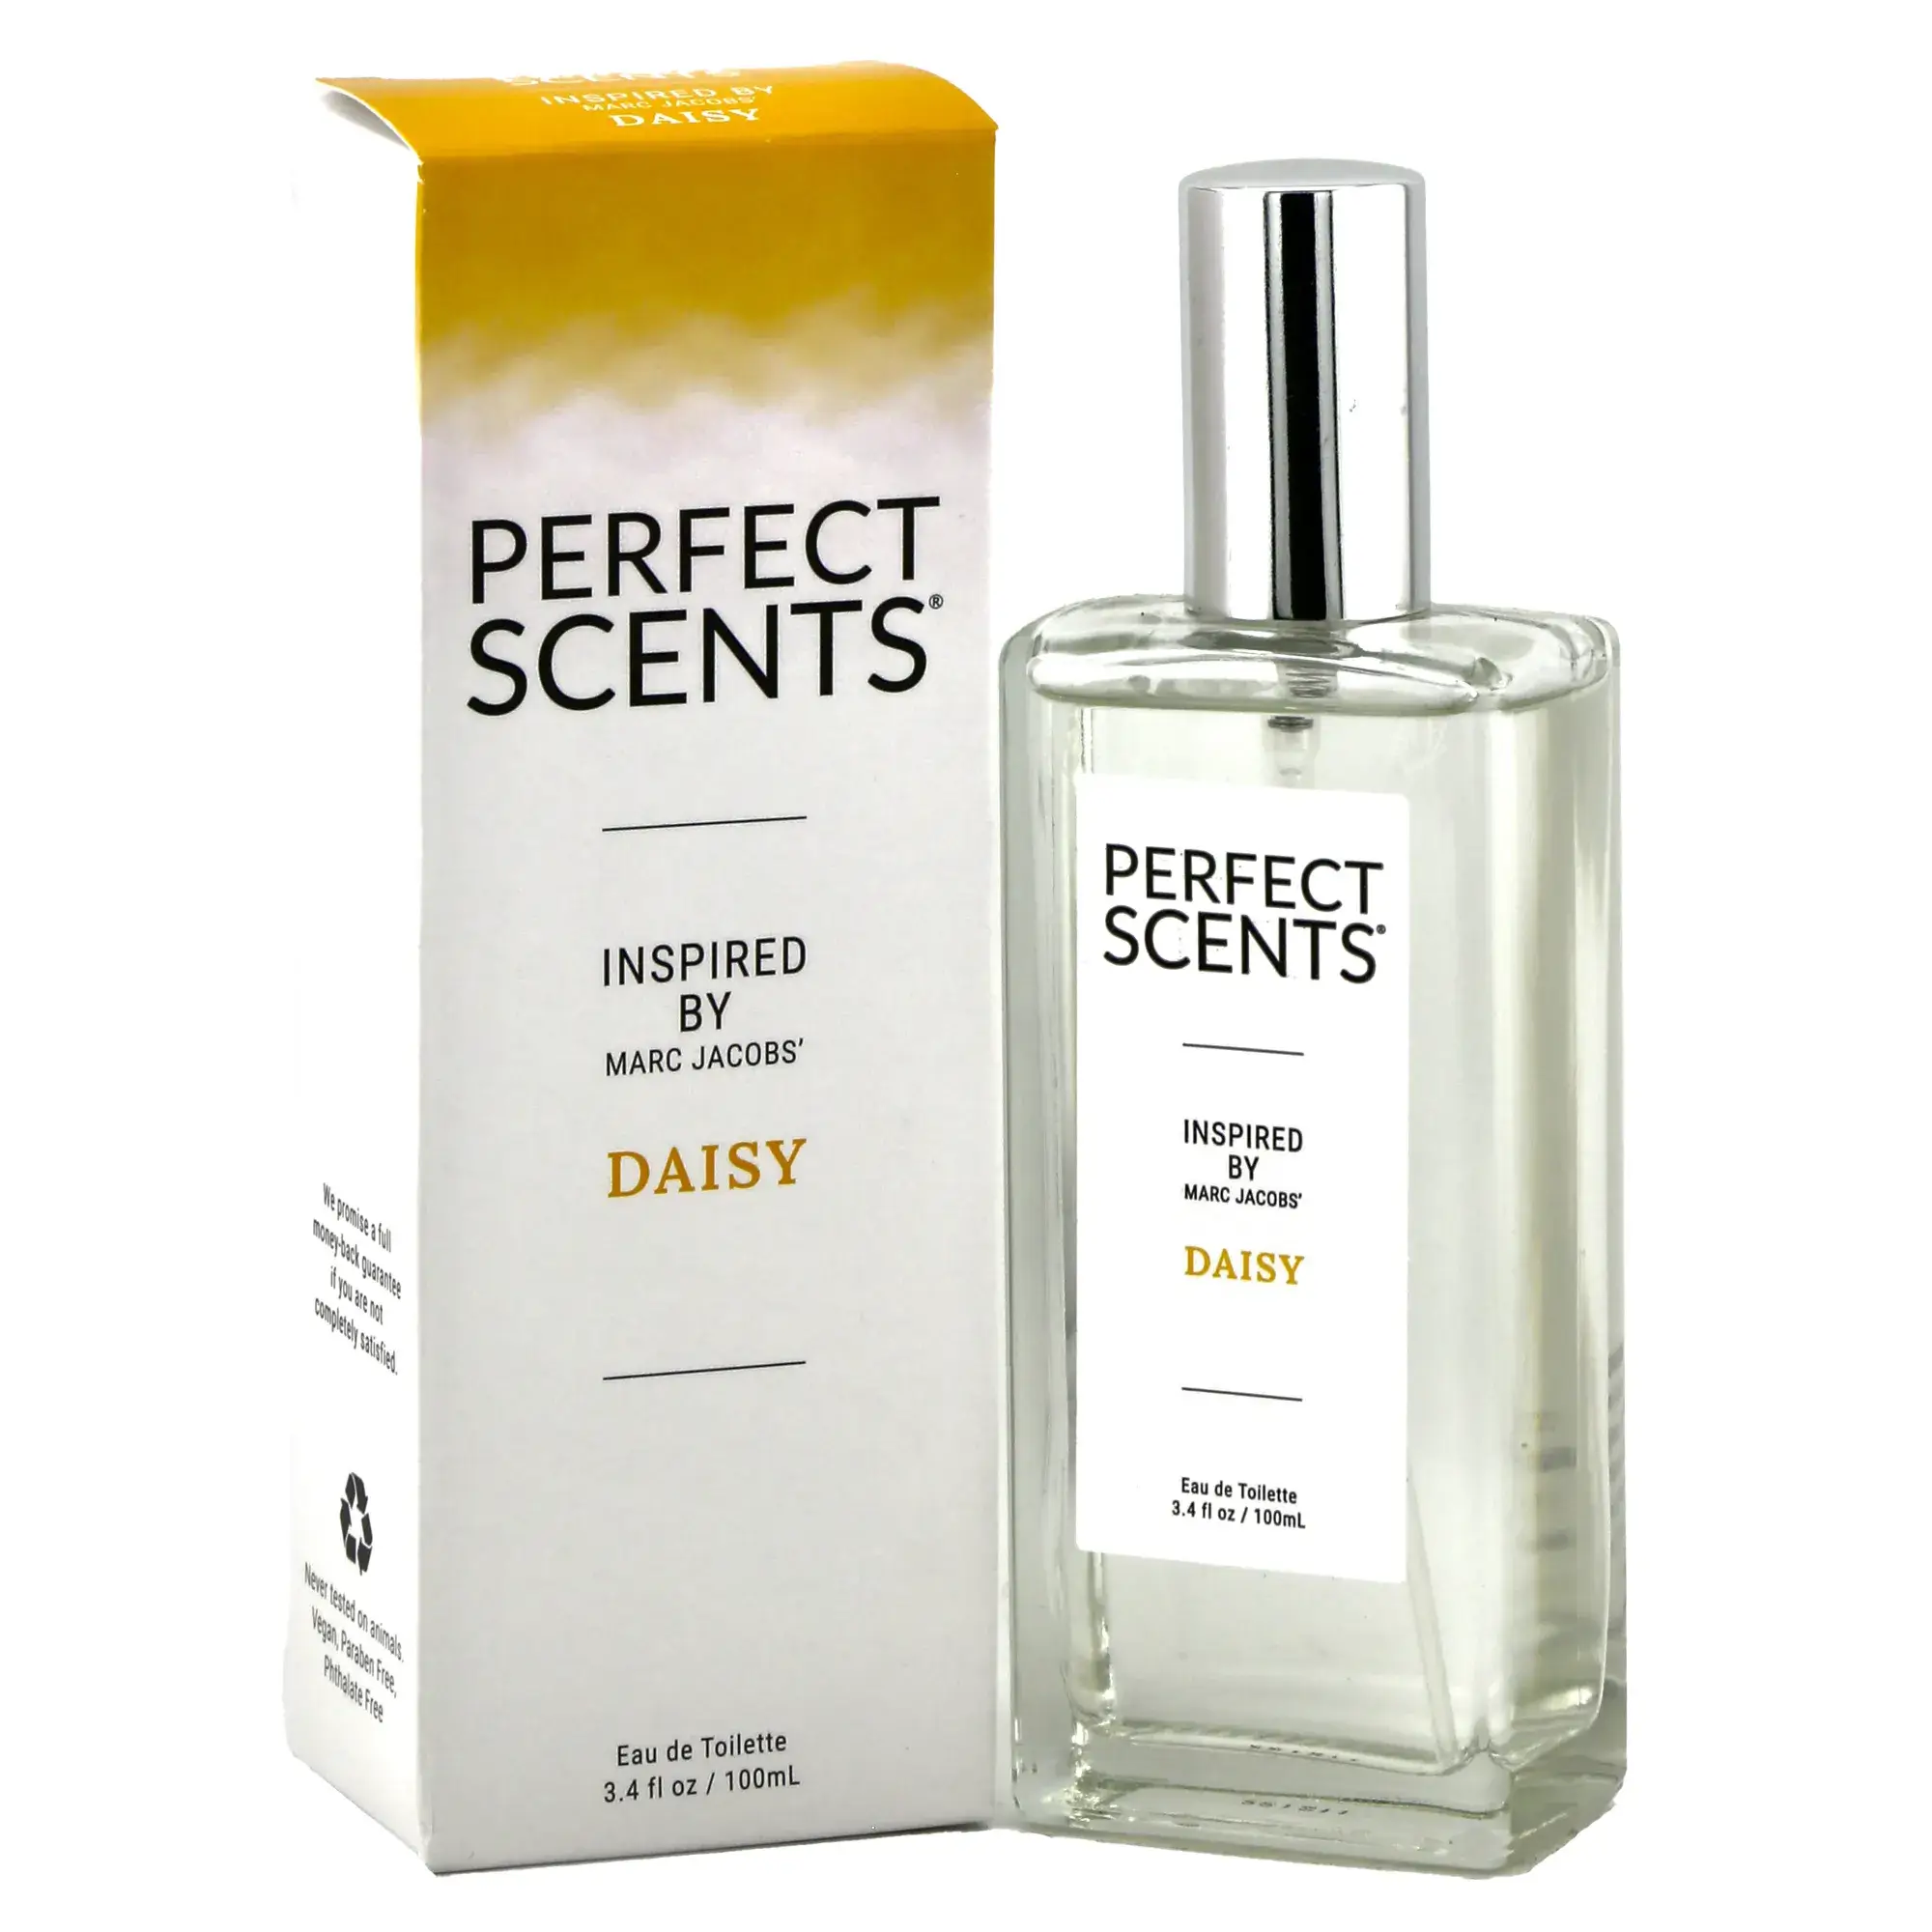 Perfect Scents - Inspired by Marc Jacob's Daisy - Instyle Fragrances